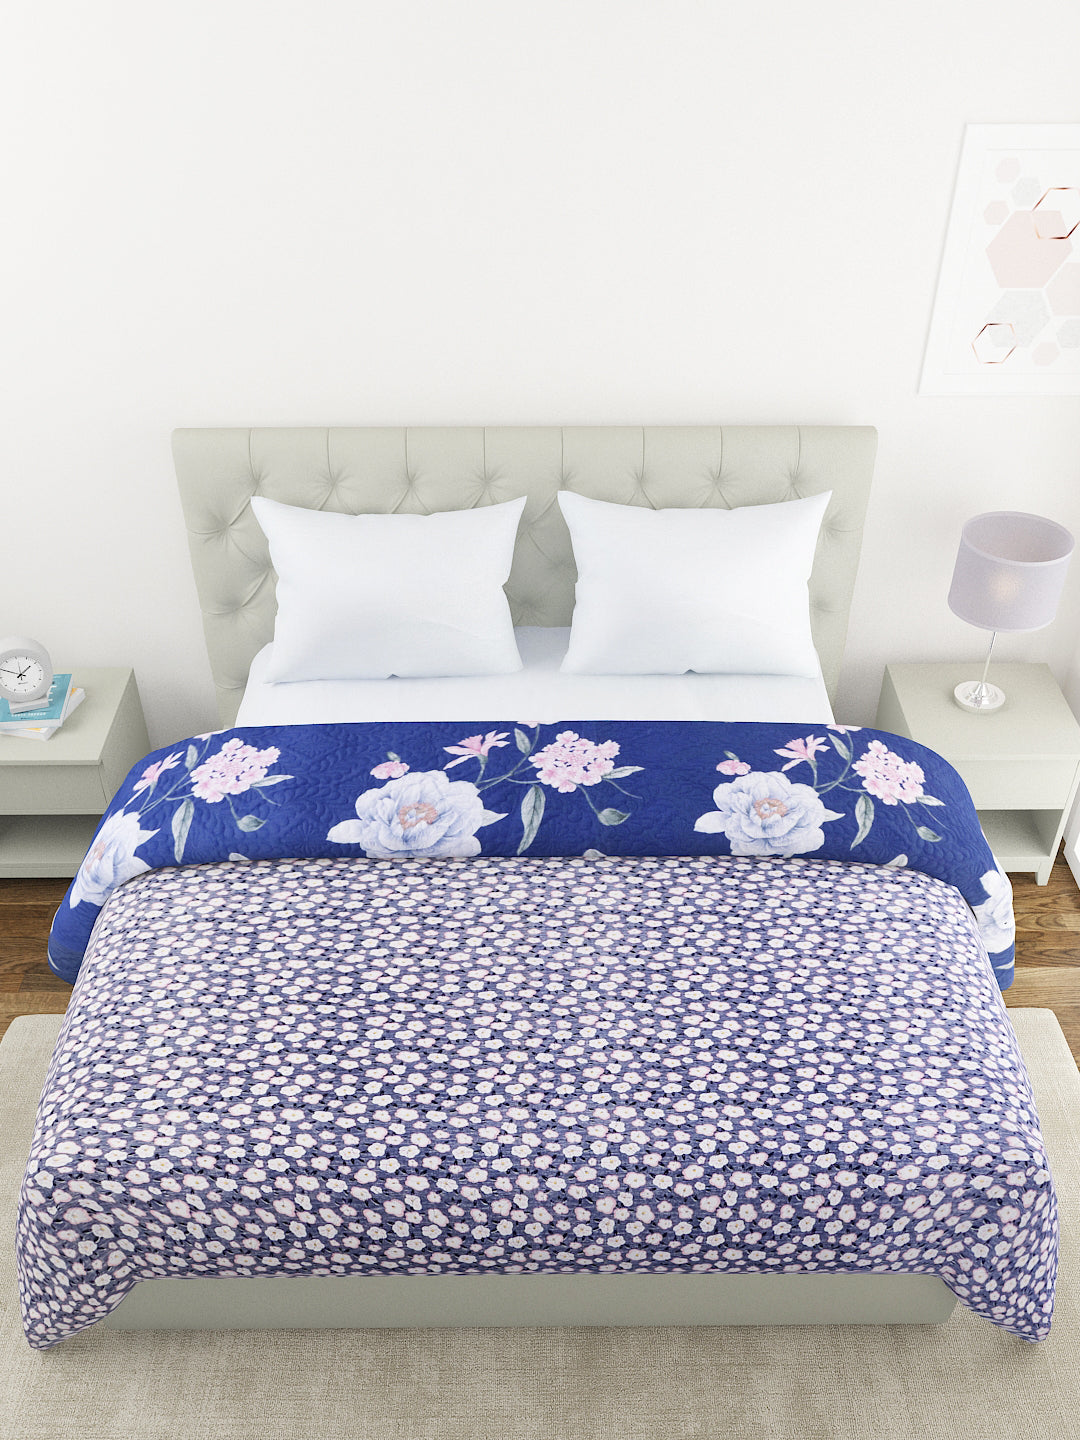 Floral Print Double Bed Light Weight Comforter-Navy Blue